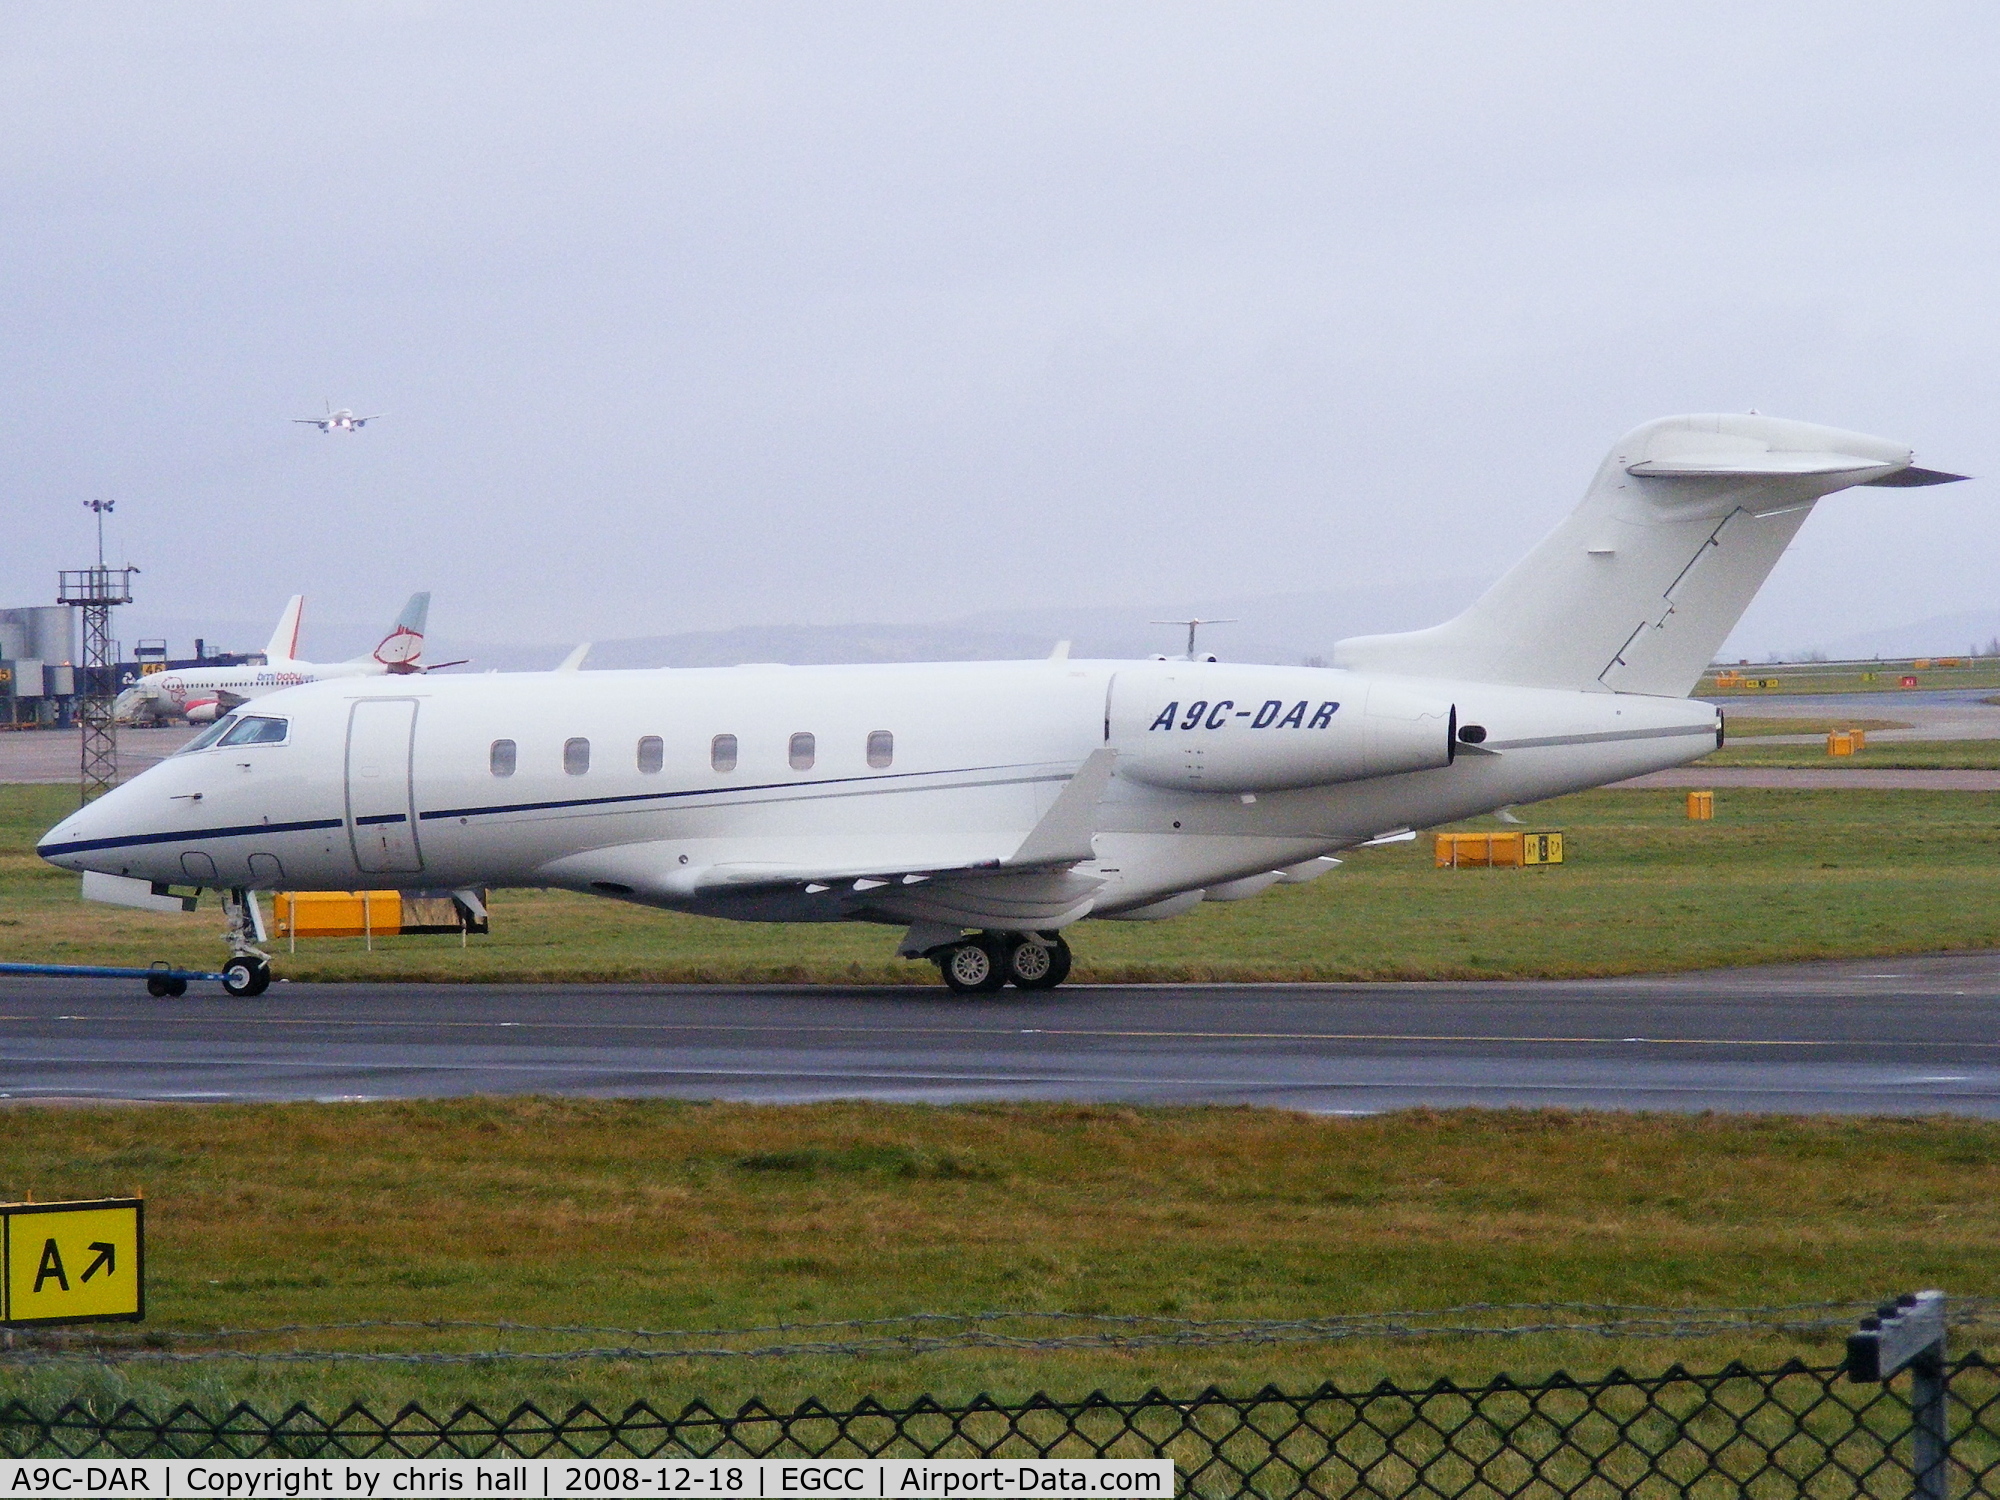 A9C-DAR, 2007 Bombardier Challenger 300 (BD-100-1A10) C/N 20169, Avcon Jet AG; Ex G-UYGB